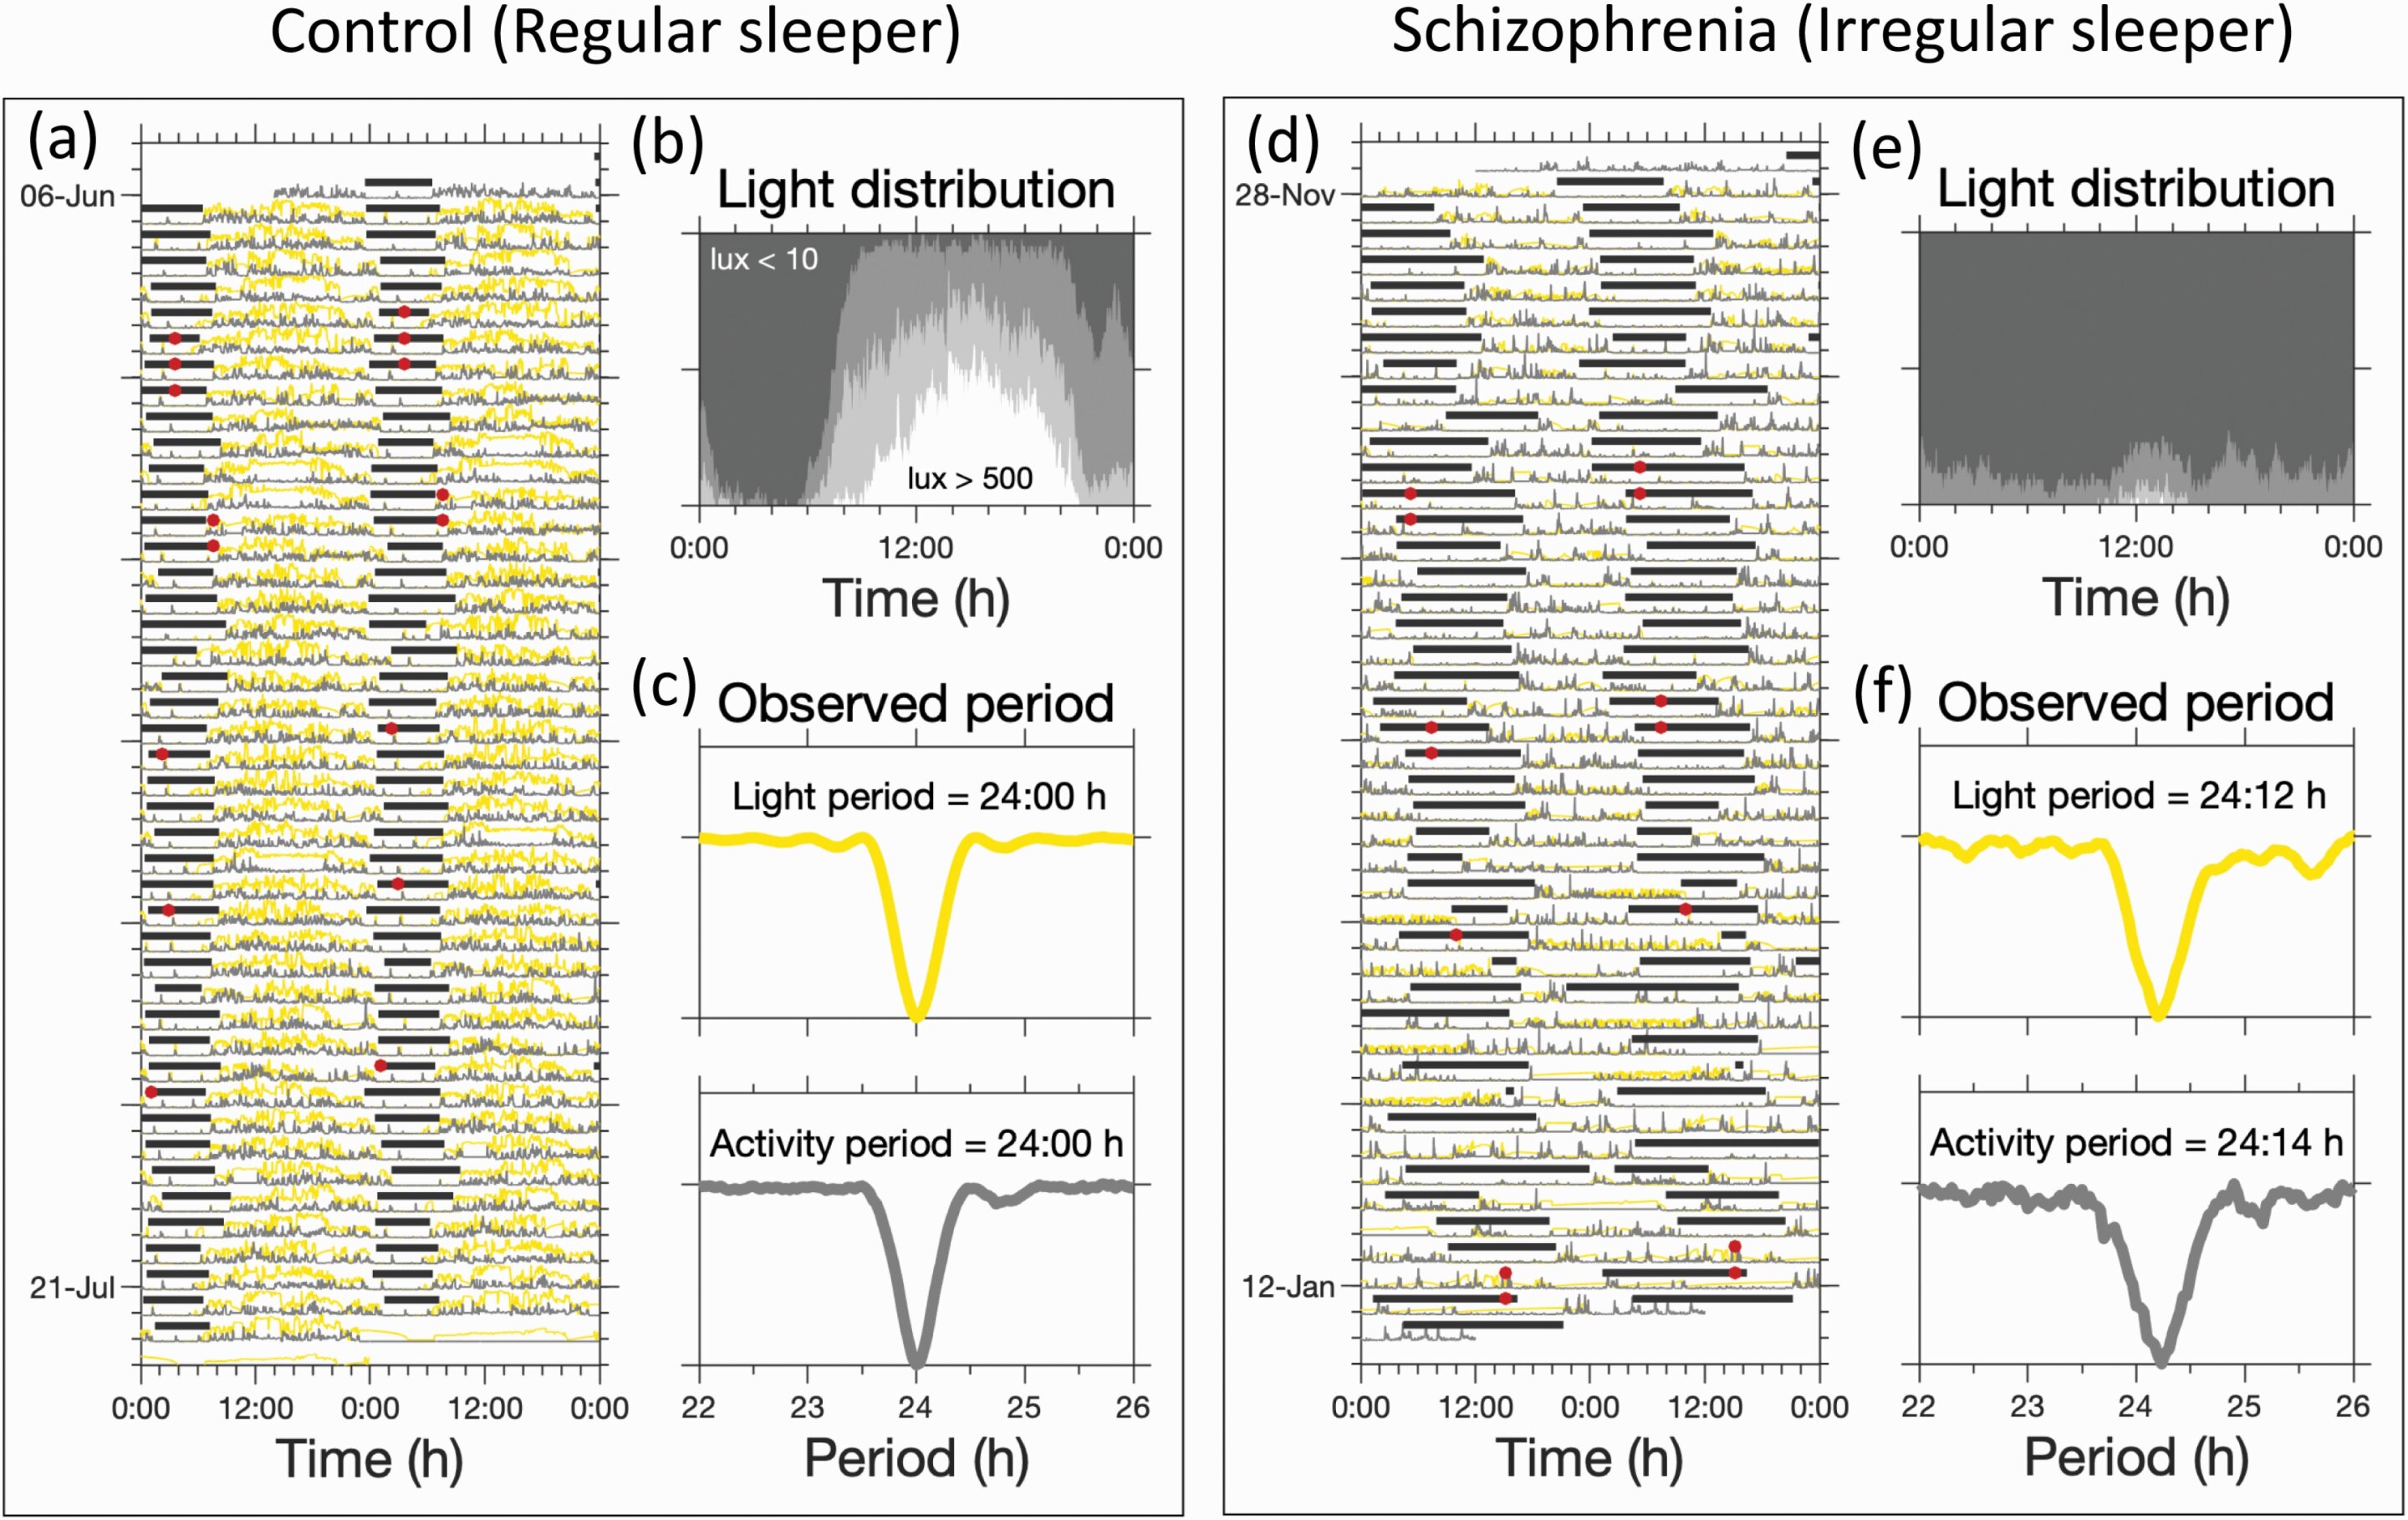 Mathematical model of light and circadian data improves sleep timing in people with schizophrenia